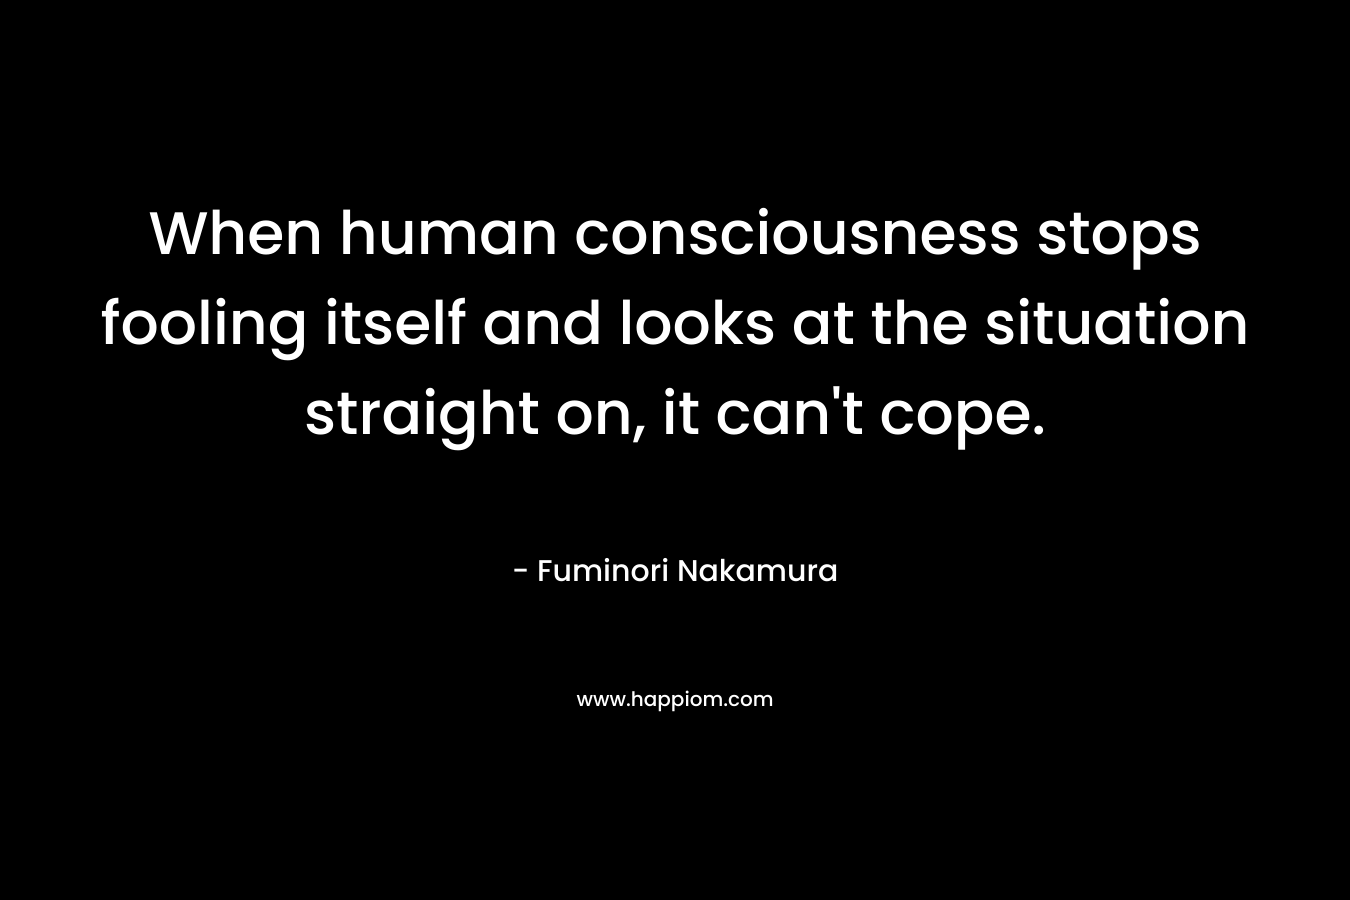 When human consciousness stops fooling itself and looks at the situation straight on, it can’t cope. – Fuminori Nakamura